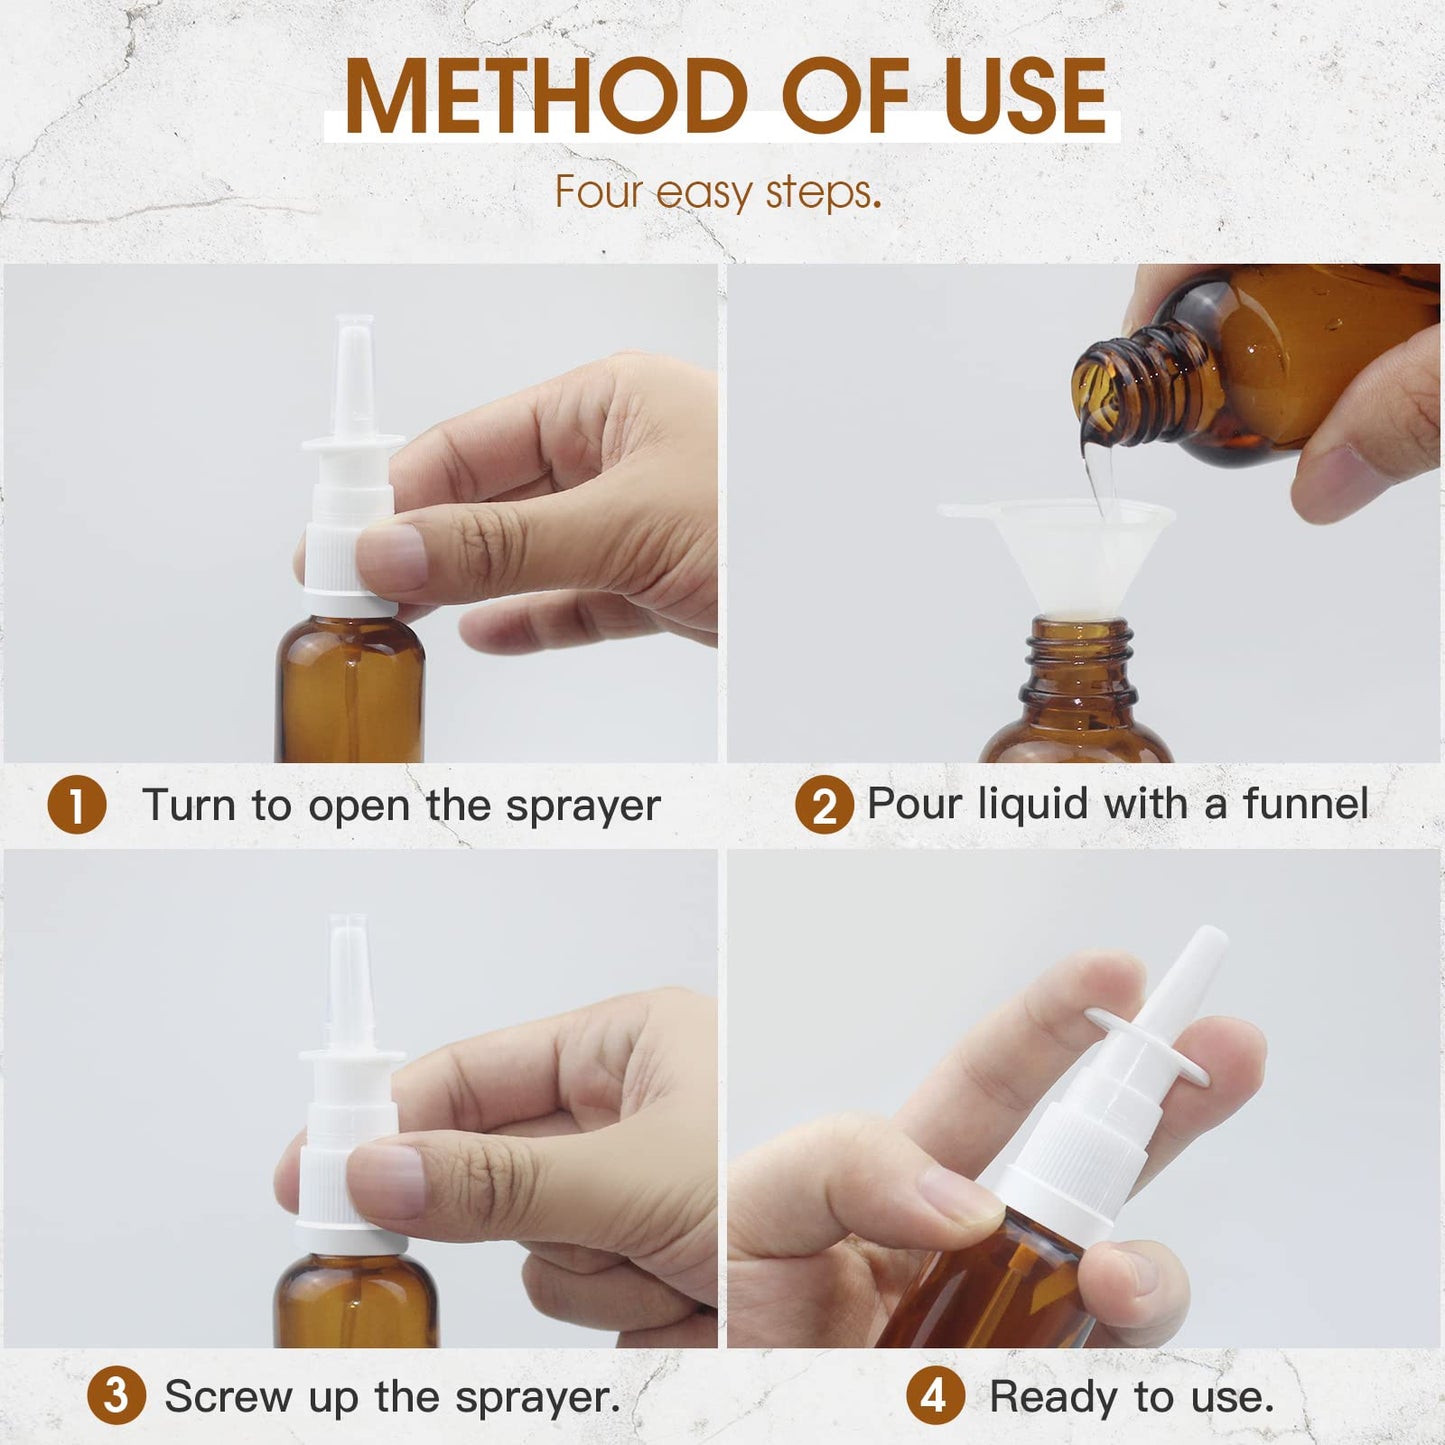 YAKESD Nasal Spray Bottle, 6 Pcs 30ML/1oz Glass Amber Refillable Fine Mist Sprayers Atomizers, Small Empty Nasal Sprayer with Oils Spray Tops, Oral/Swivel Sprayers, Funnels and Labels